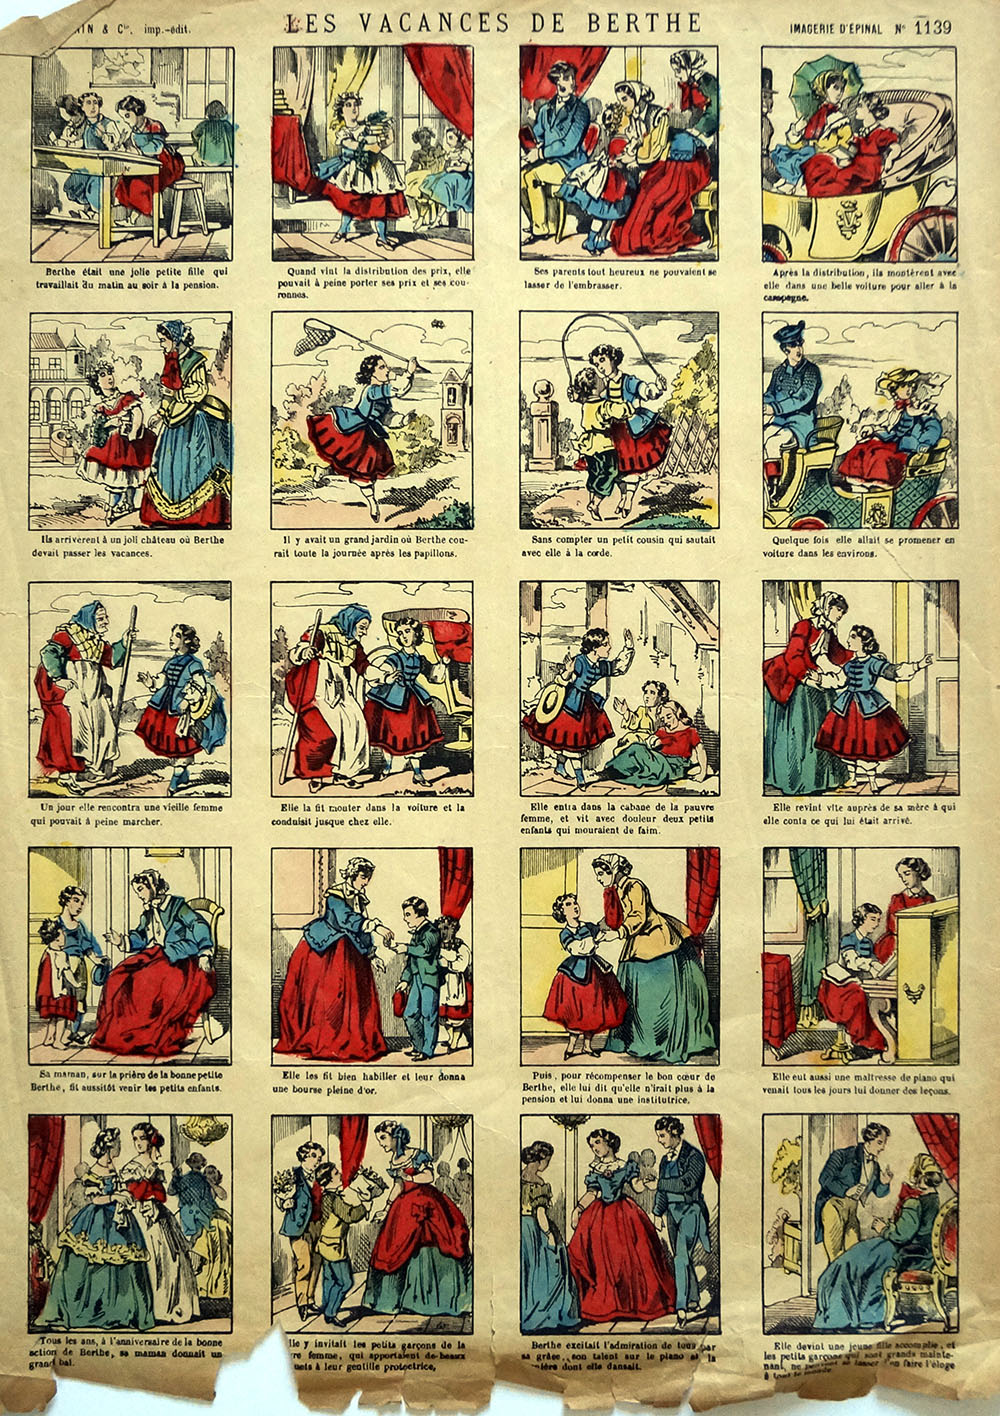 Imagerie dEpinal Les Vacances de Berthe art by EARLY FRENCH original comic strips from 1888 at The Illustration Art Gallery